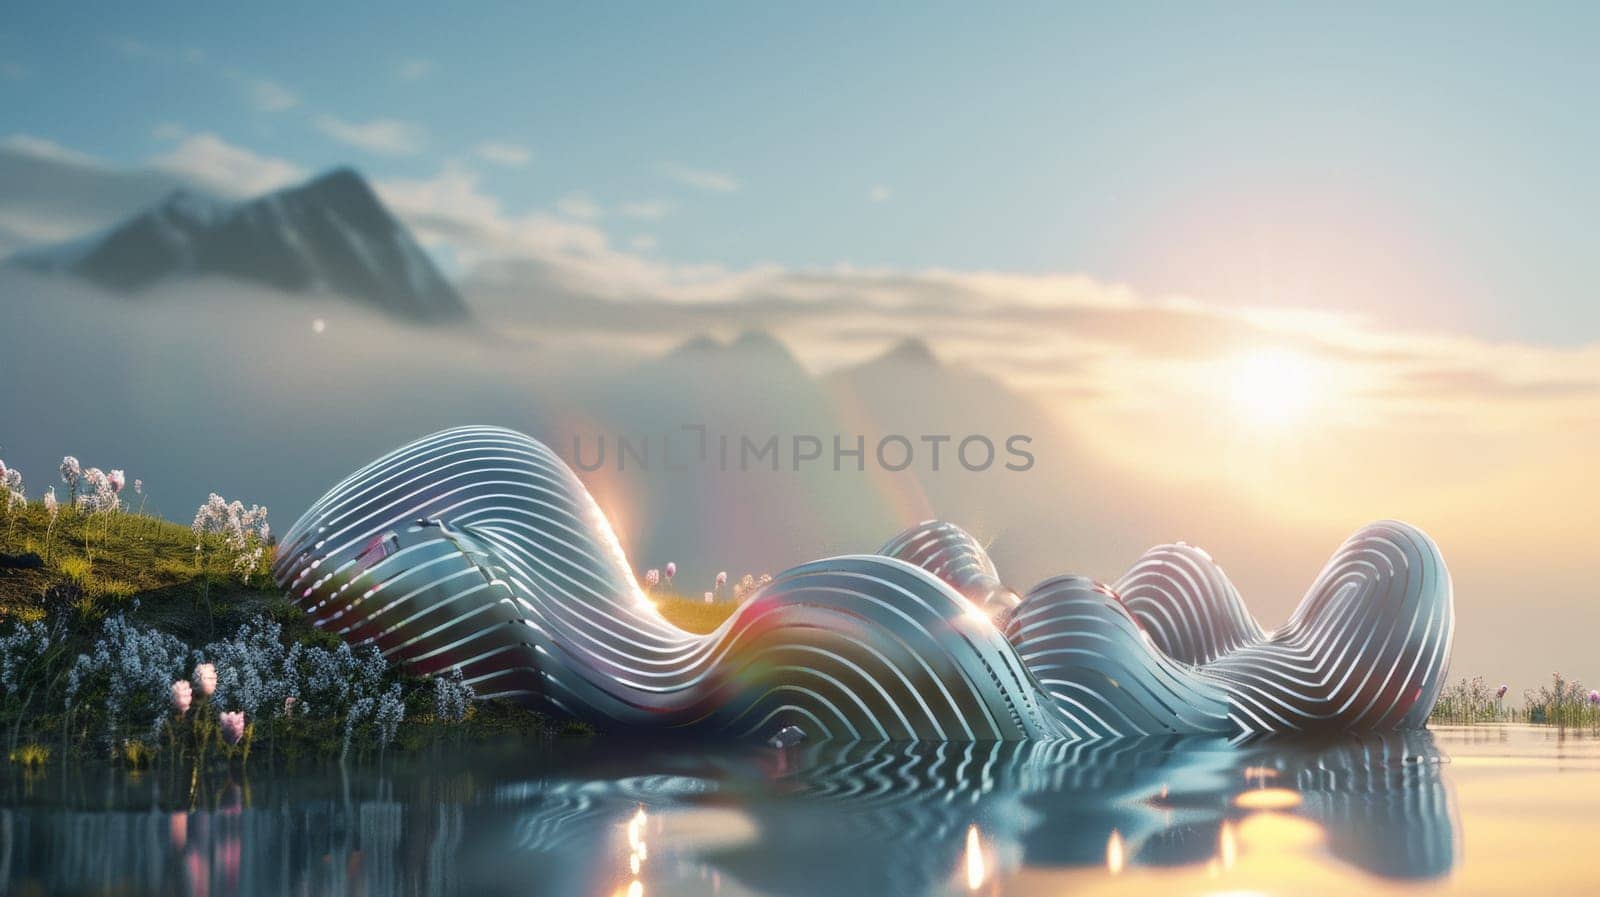 A sculpture of a large wave sitting in the water near mountains, AI by starush